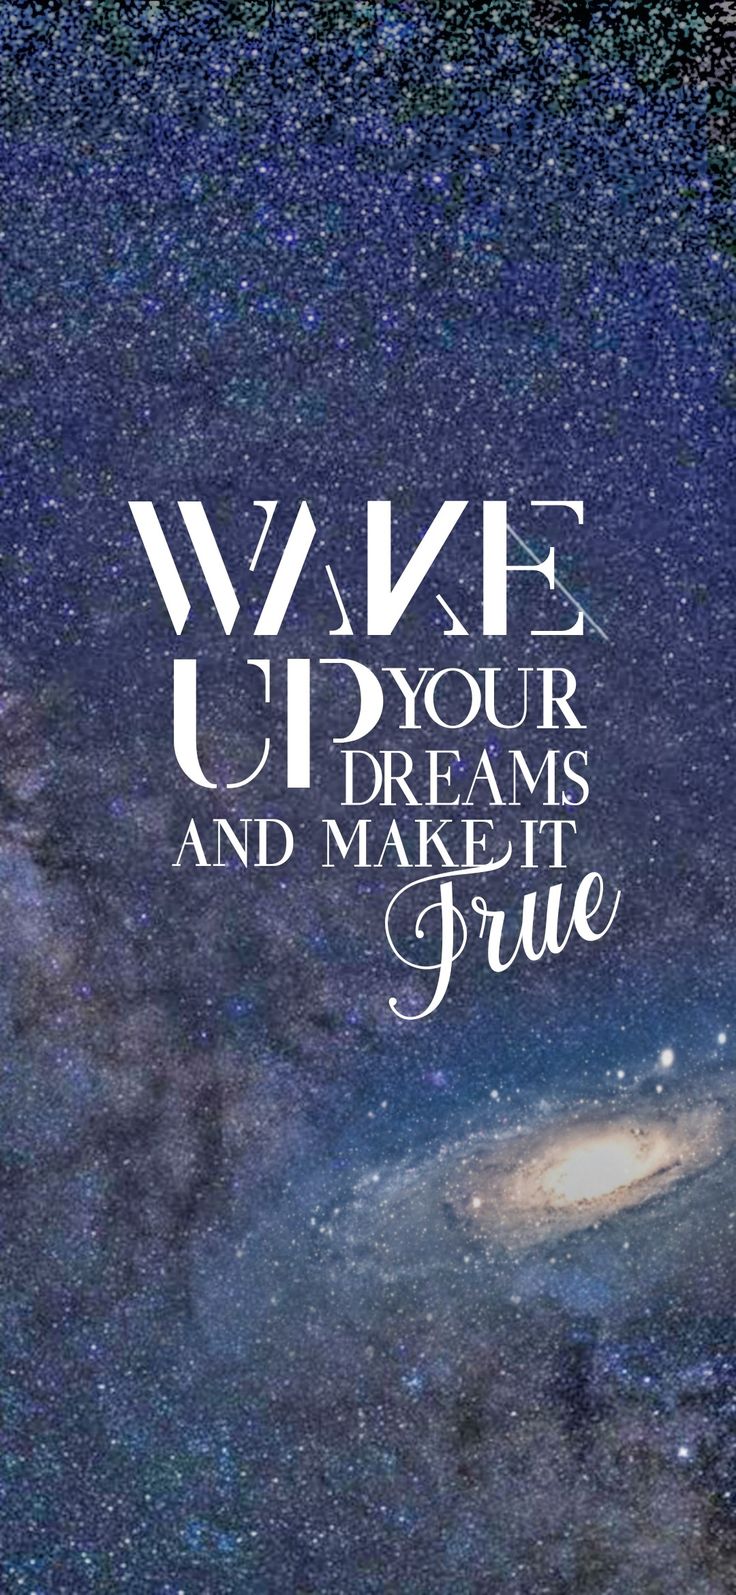 Wake Up. Life quotes deep, Song lyrics wallpaper, Quotes to live by